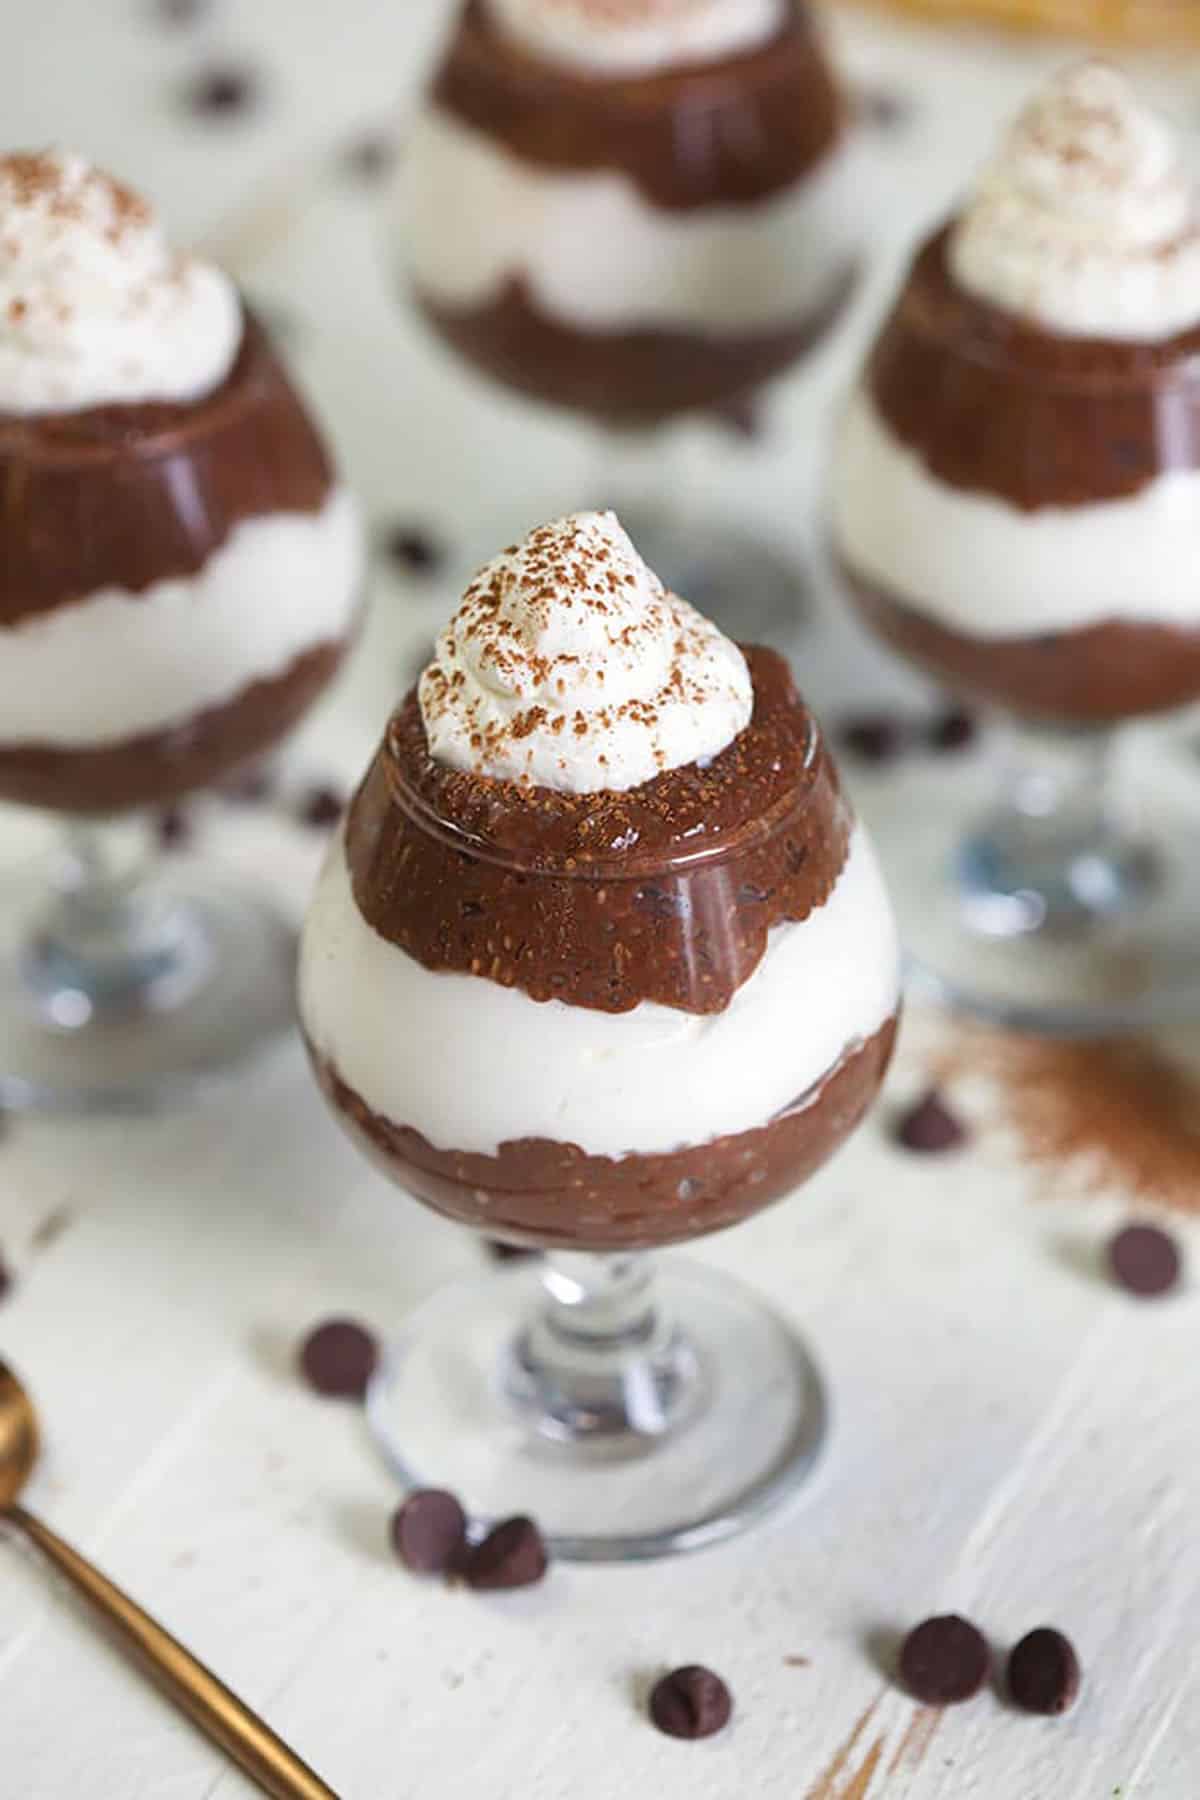 Chocolate Chia Pudding parfaits in mini wine glassed on a white background.